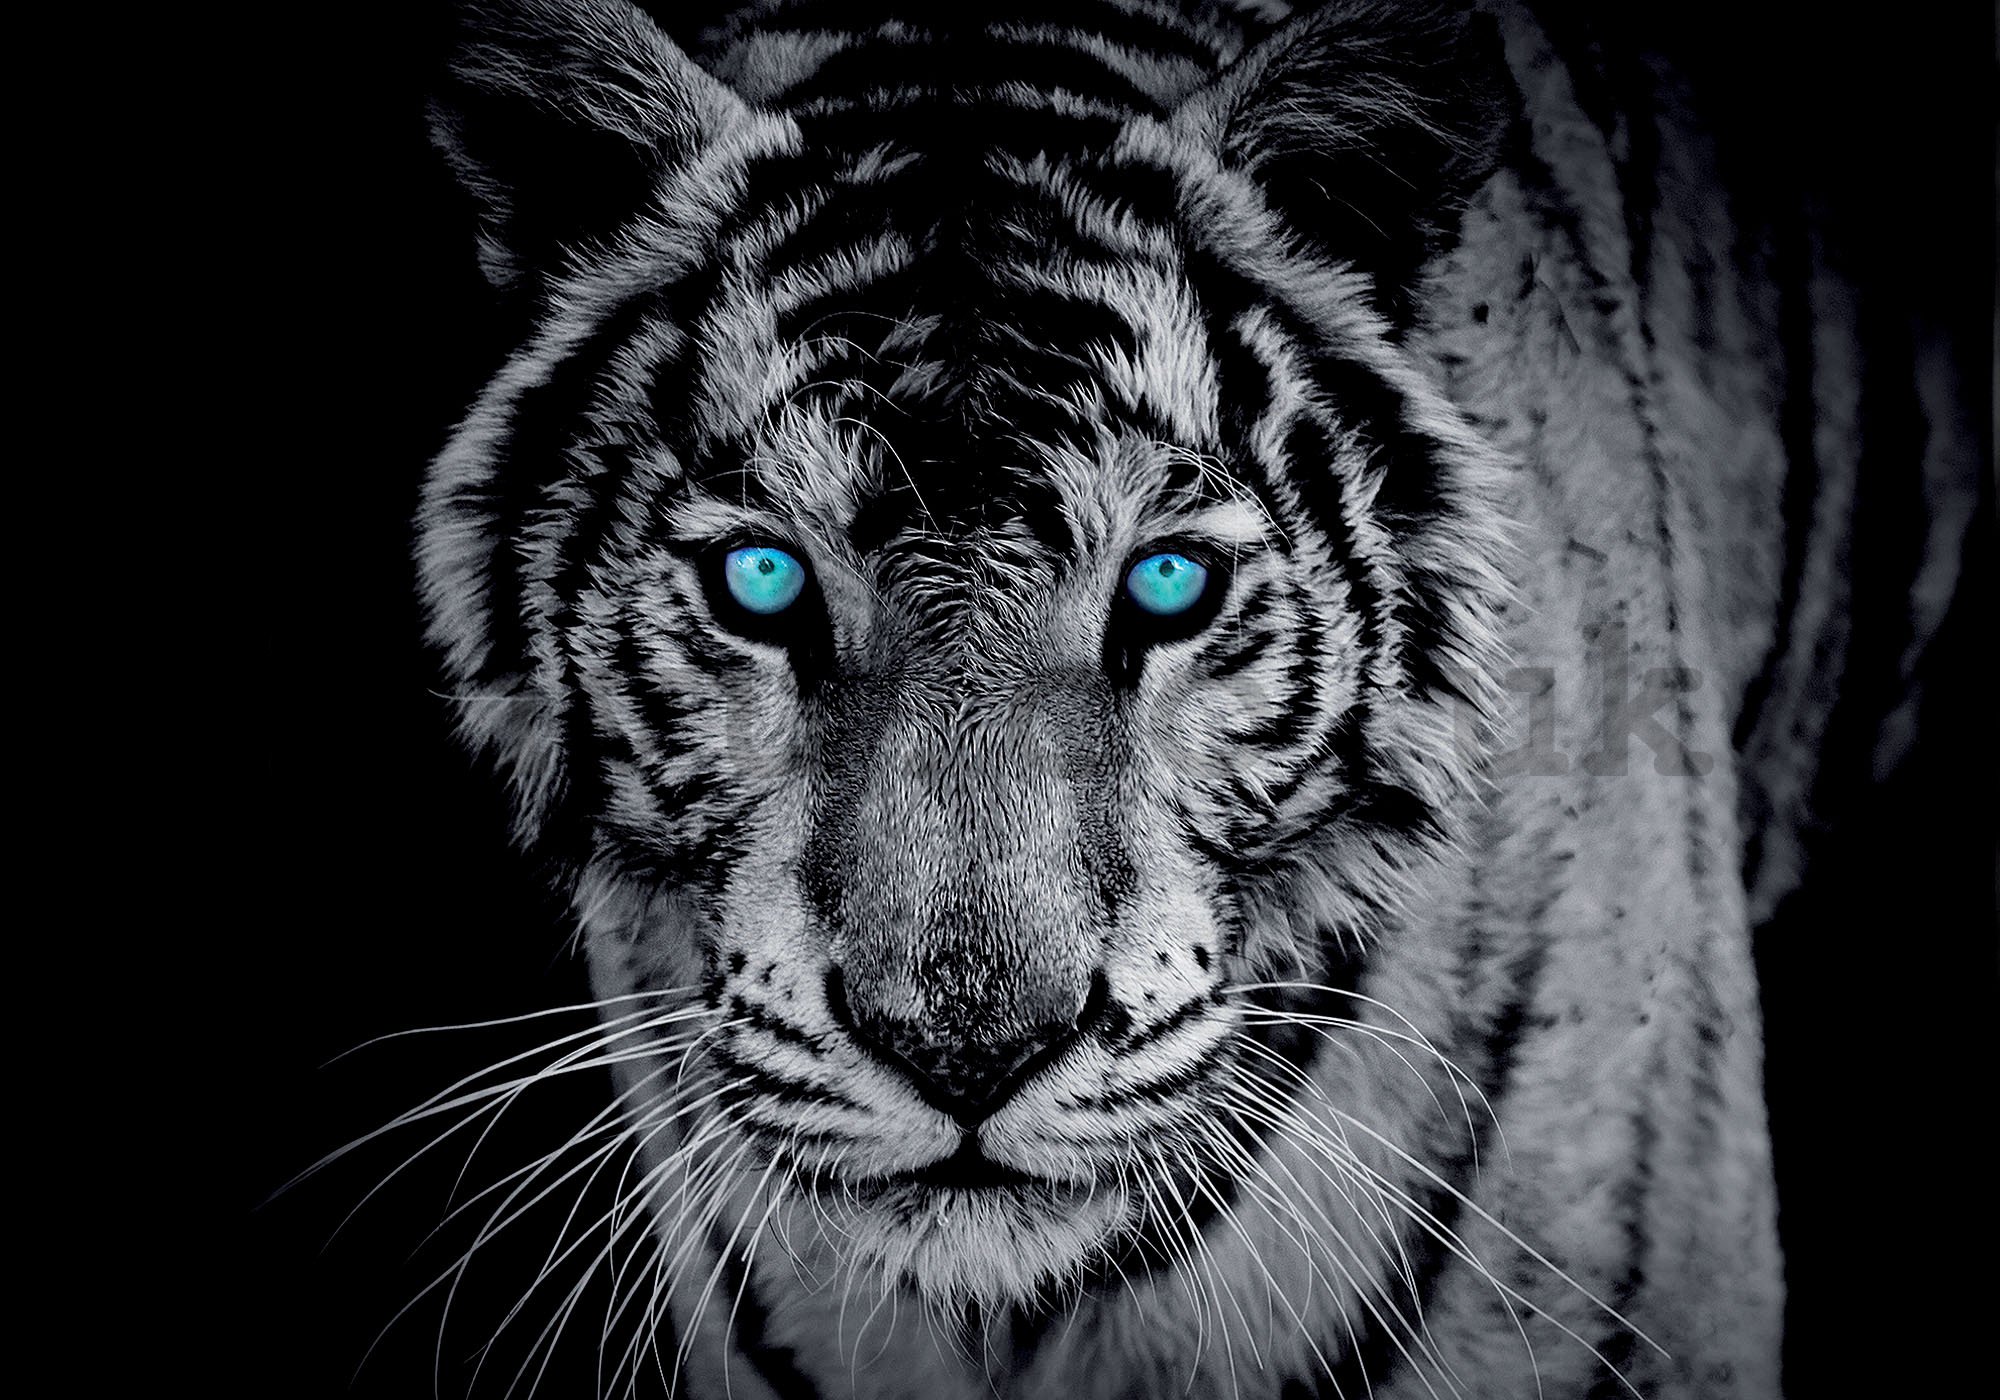 Wall Mural: Black and white tiger - 254x368 cm